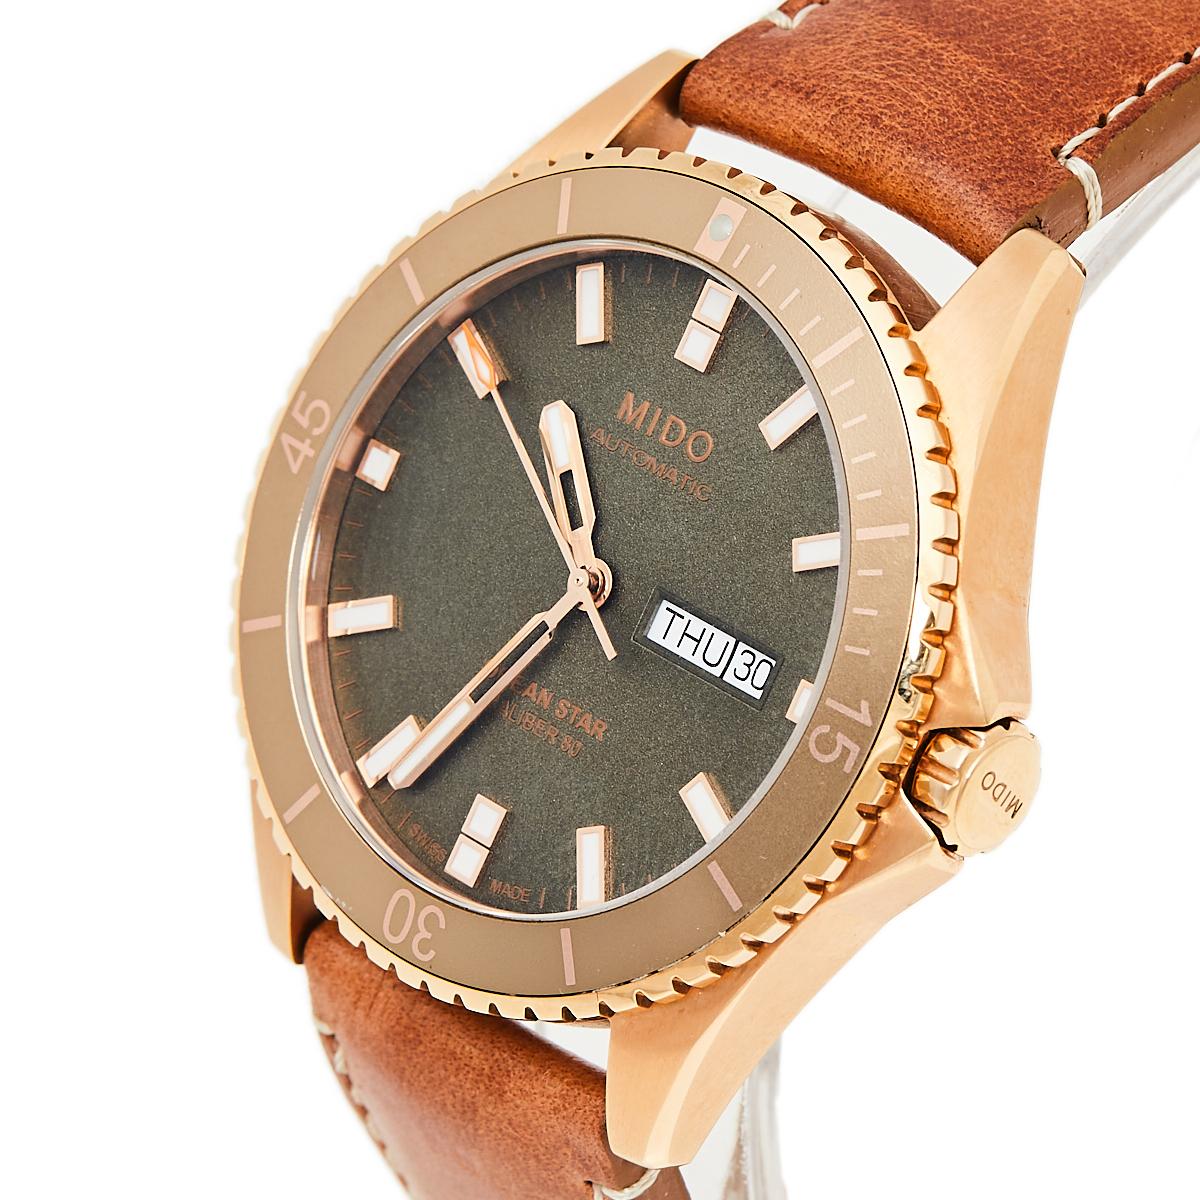 This luxe Mido Automatic watch features a green dial with elegant hour markers, three hands, and a day-date window. The 42.5 MM case in rose gold PVD stainless steel is held by brown leather straps. The water resistance of up to 200 meters is an